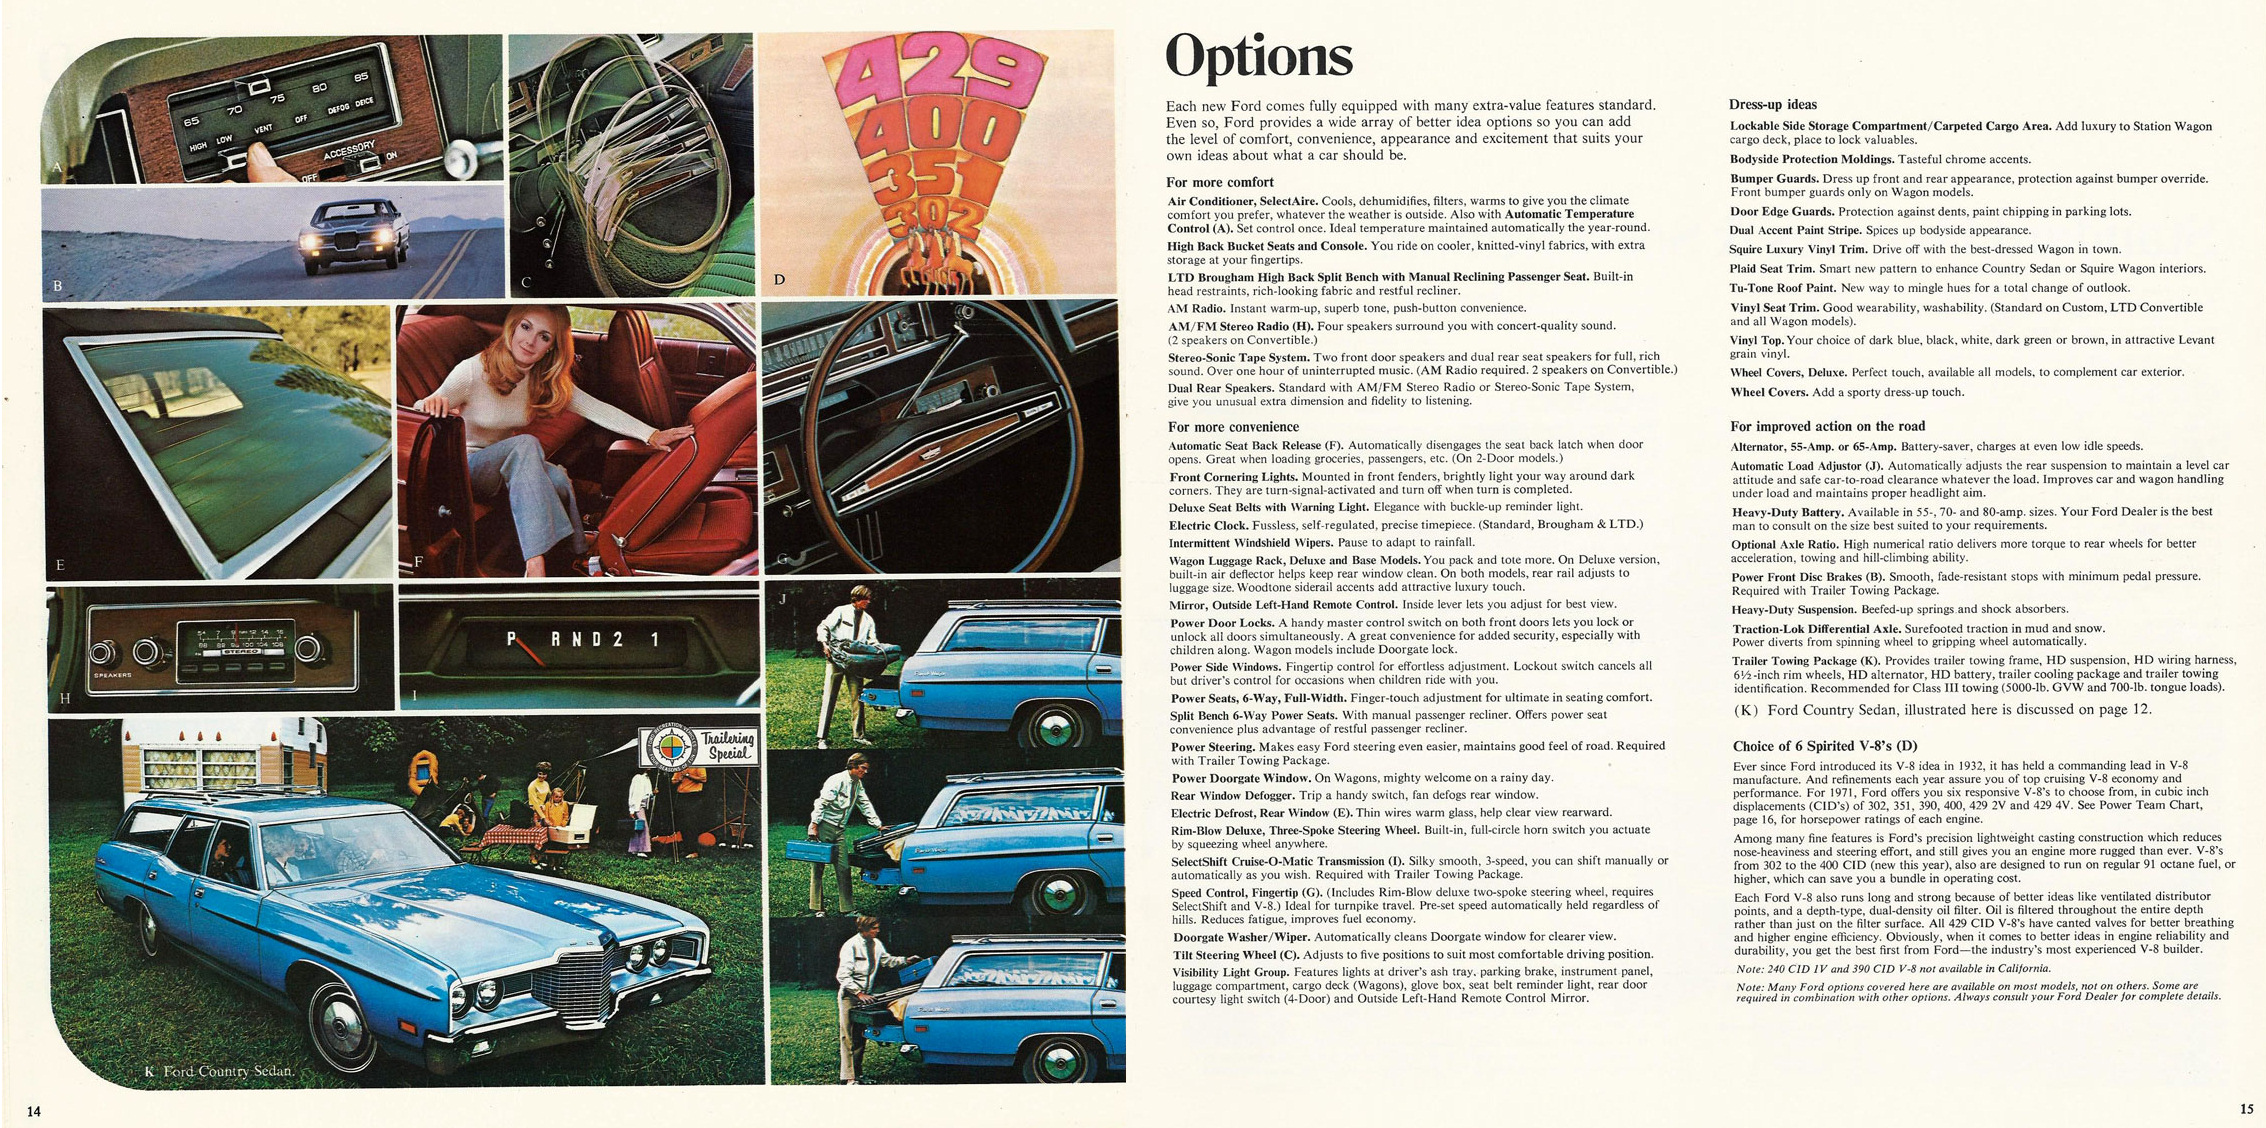 1971_Ford_Full_Size-14-15